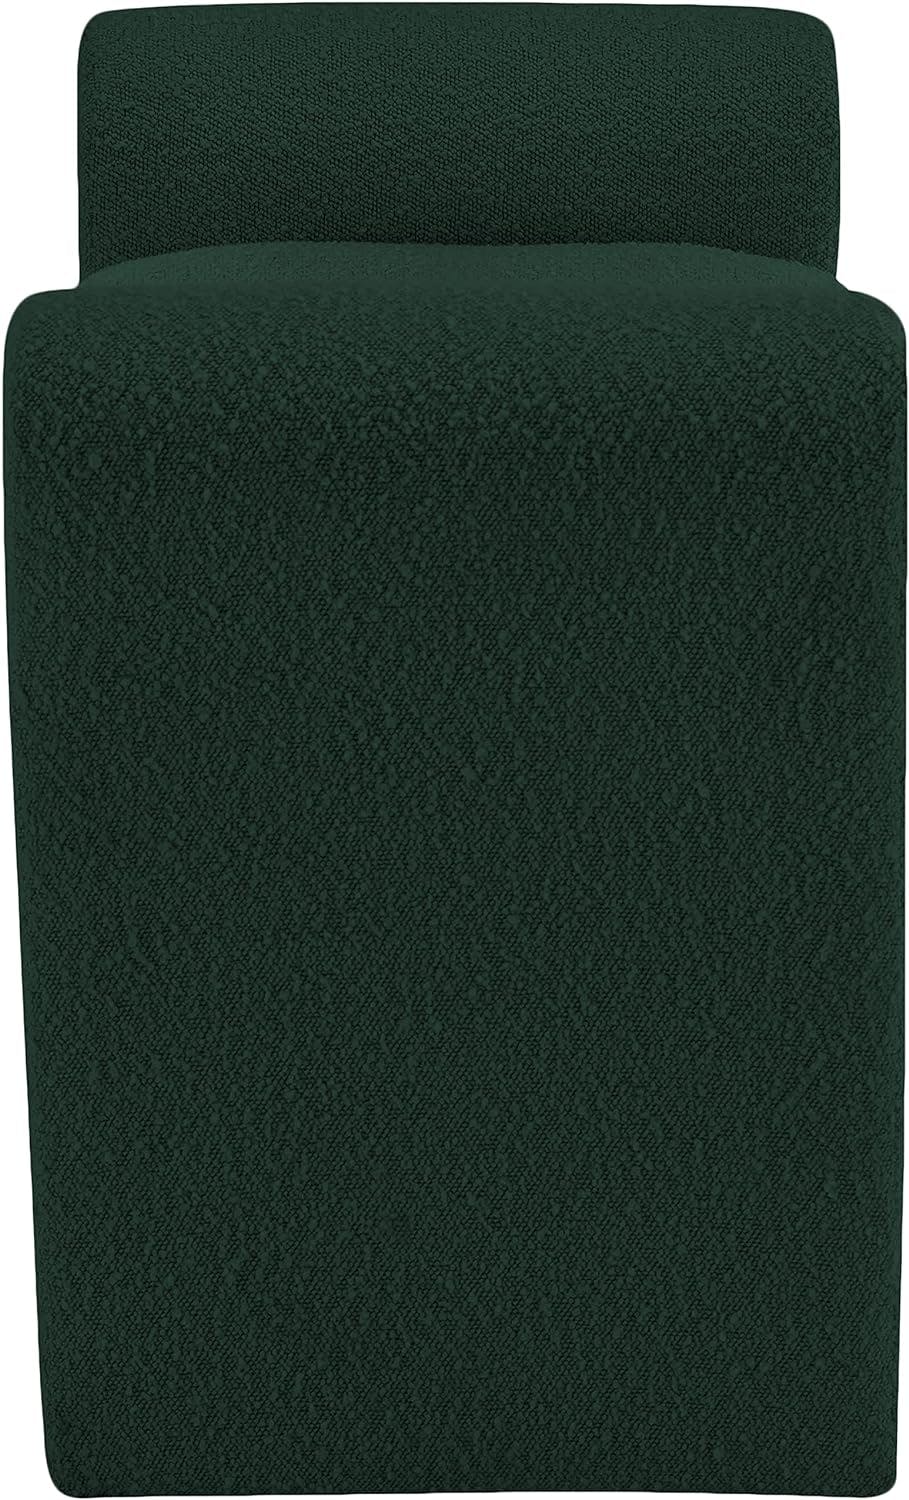 Contemporary Green Boucle Upholstered Bench with Curved Arms